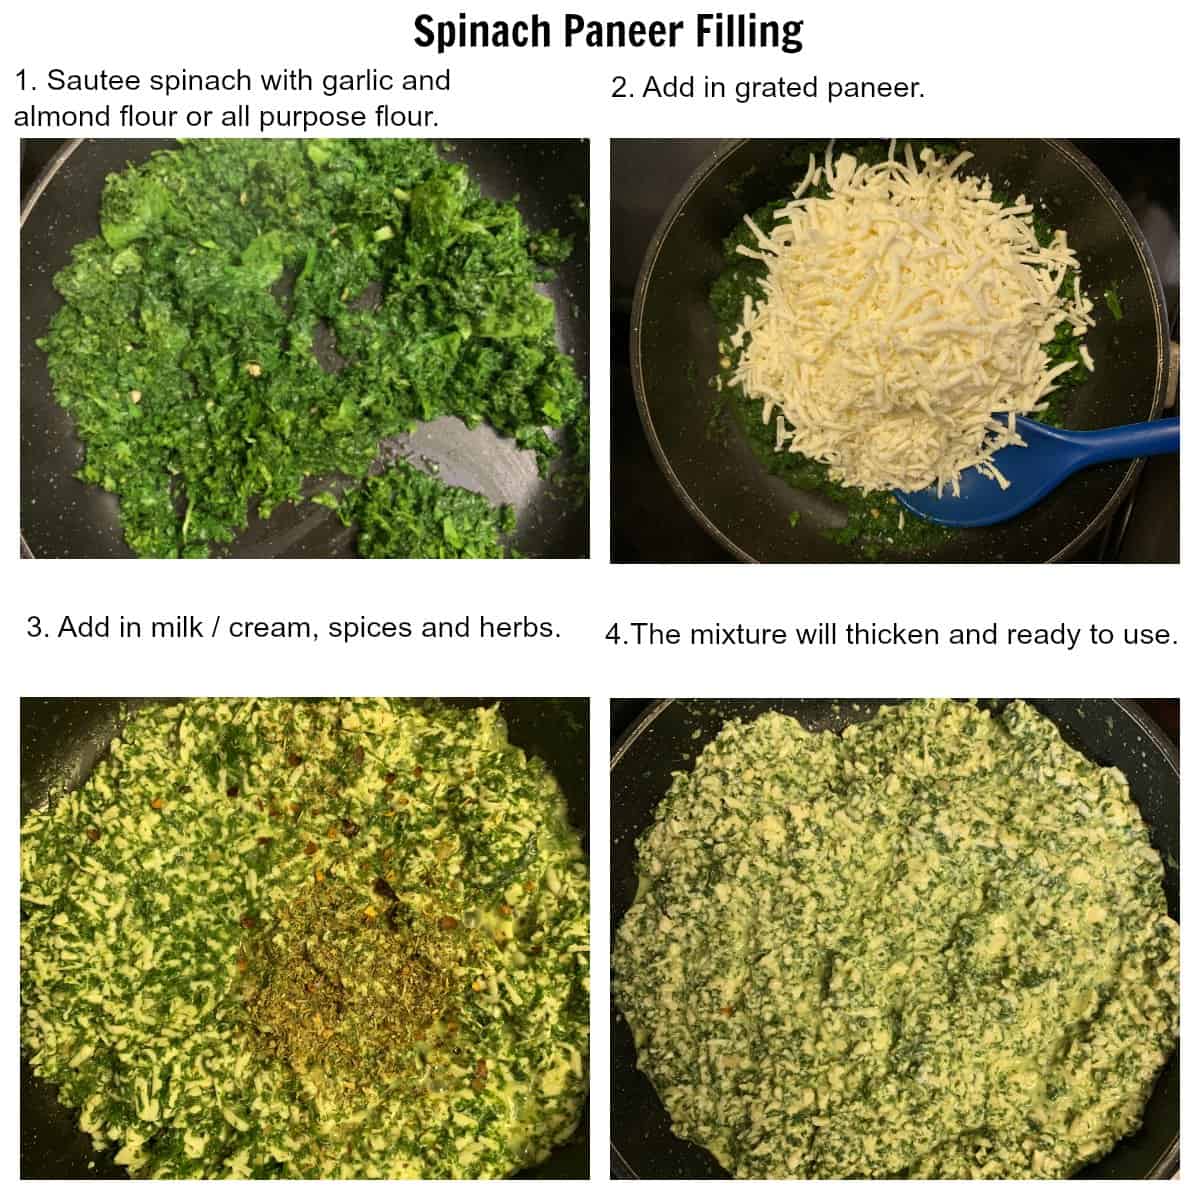 Steps in making spinach paneer filling